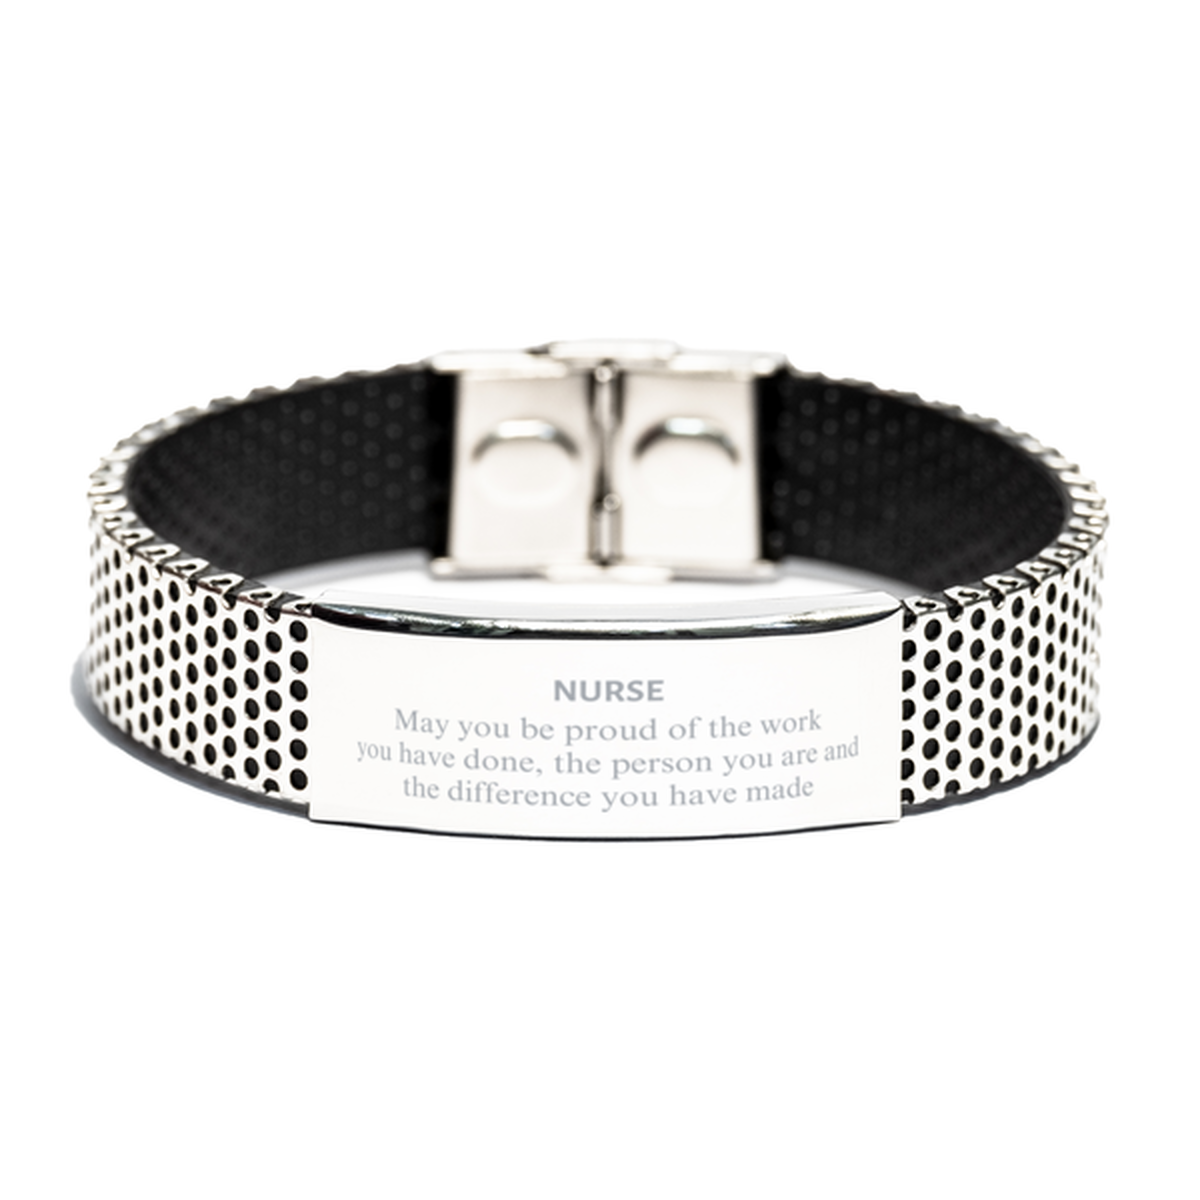 Nurse May you be proud of the work you have done, Retirement Nurse Stainless Steel Bracelet for Colleague Appreciation Gifts Amazing for Nurse